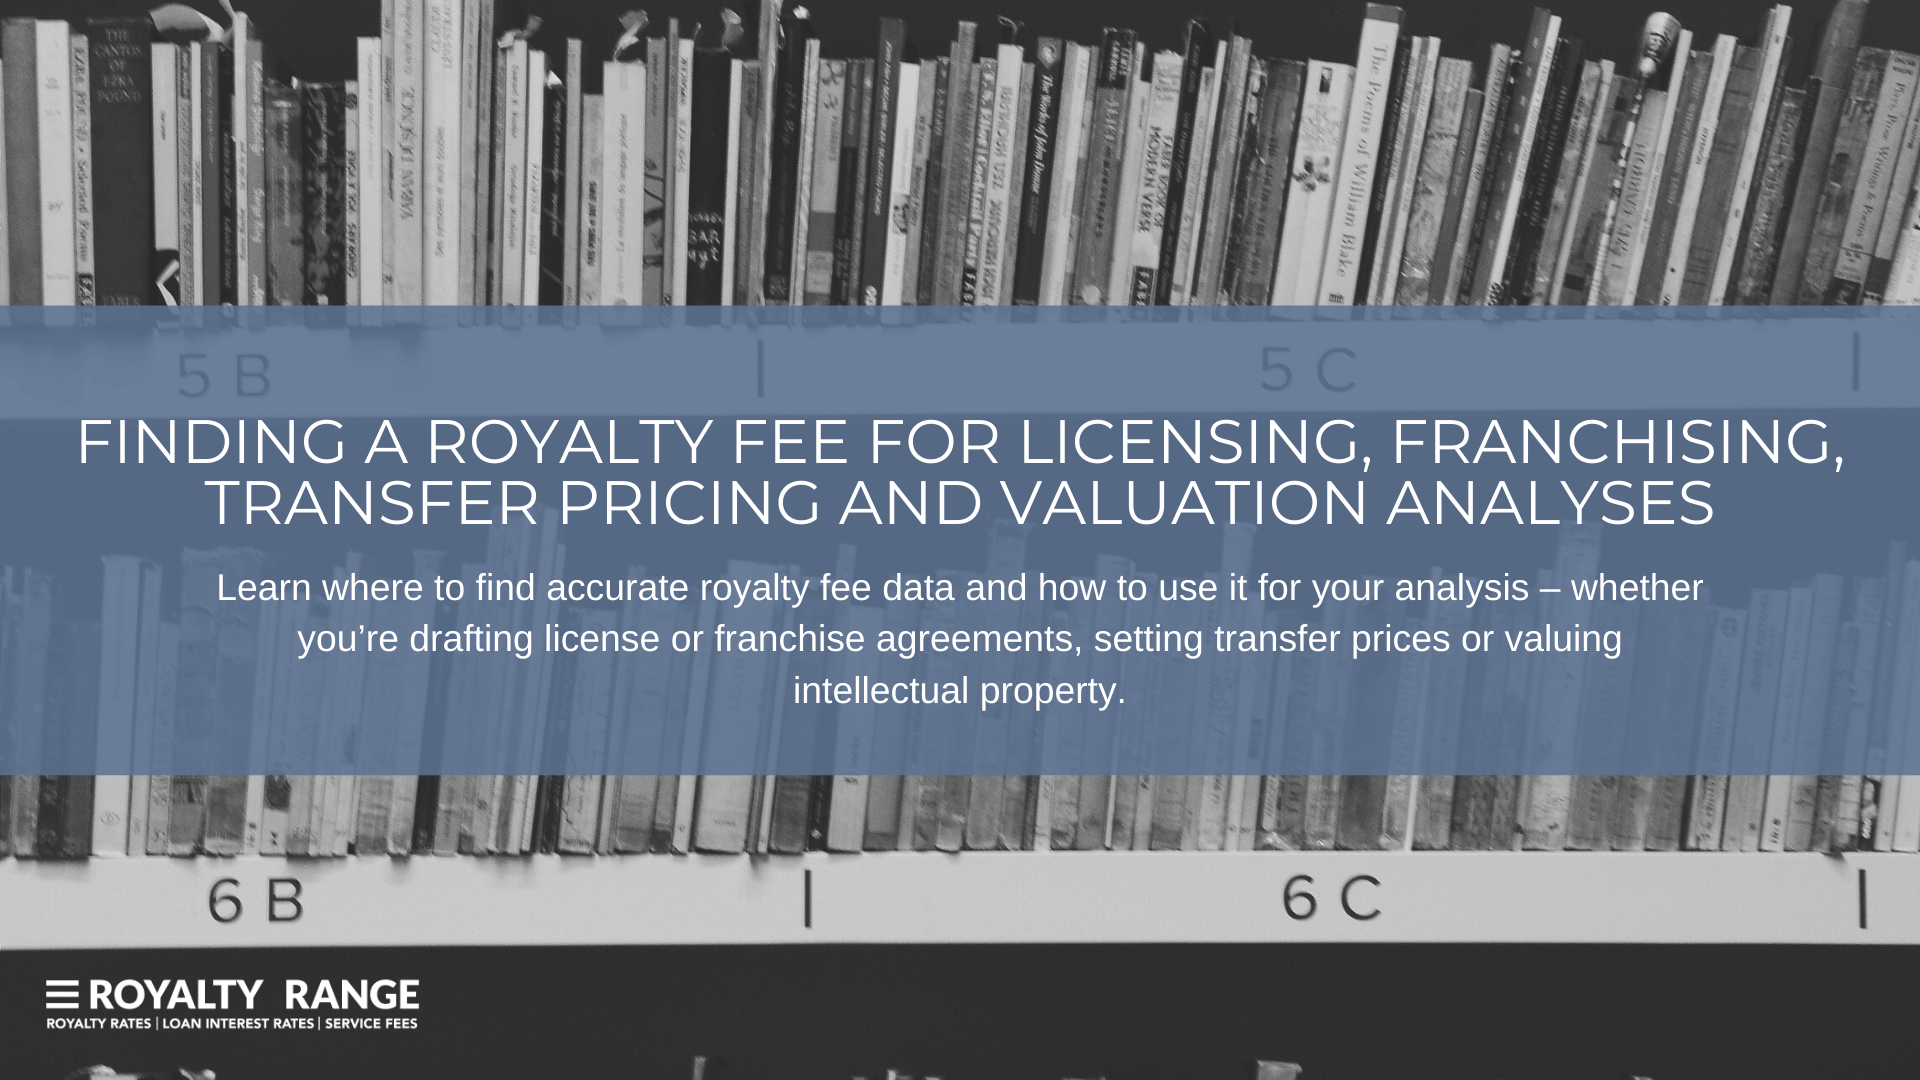 Finding a royalty fee for licensing, franchising, transfer pricing and valuation analyses